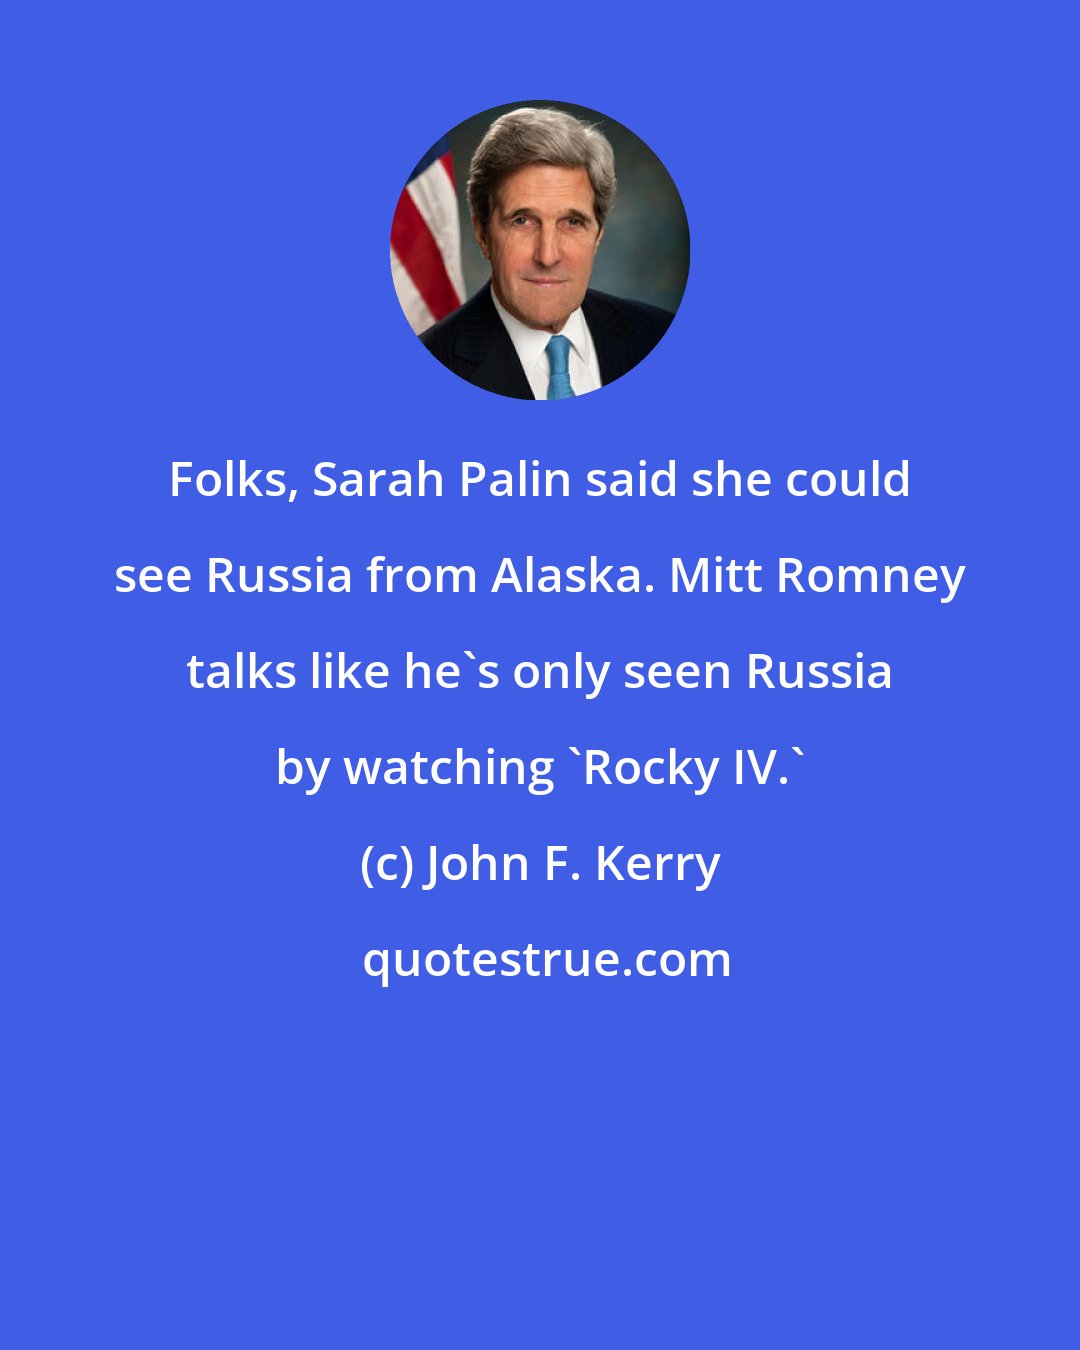 John F. Kerry: Folks, Sarah Palin said she could see Russia from Alaska. Mitt Romney talks like he's only seen Russia by watching 'Rocky IV.'